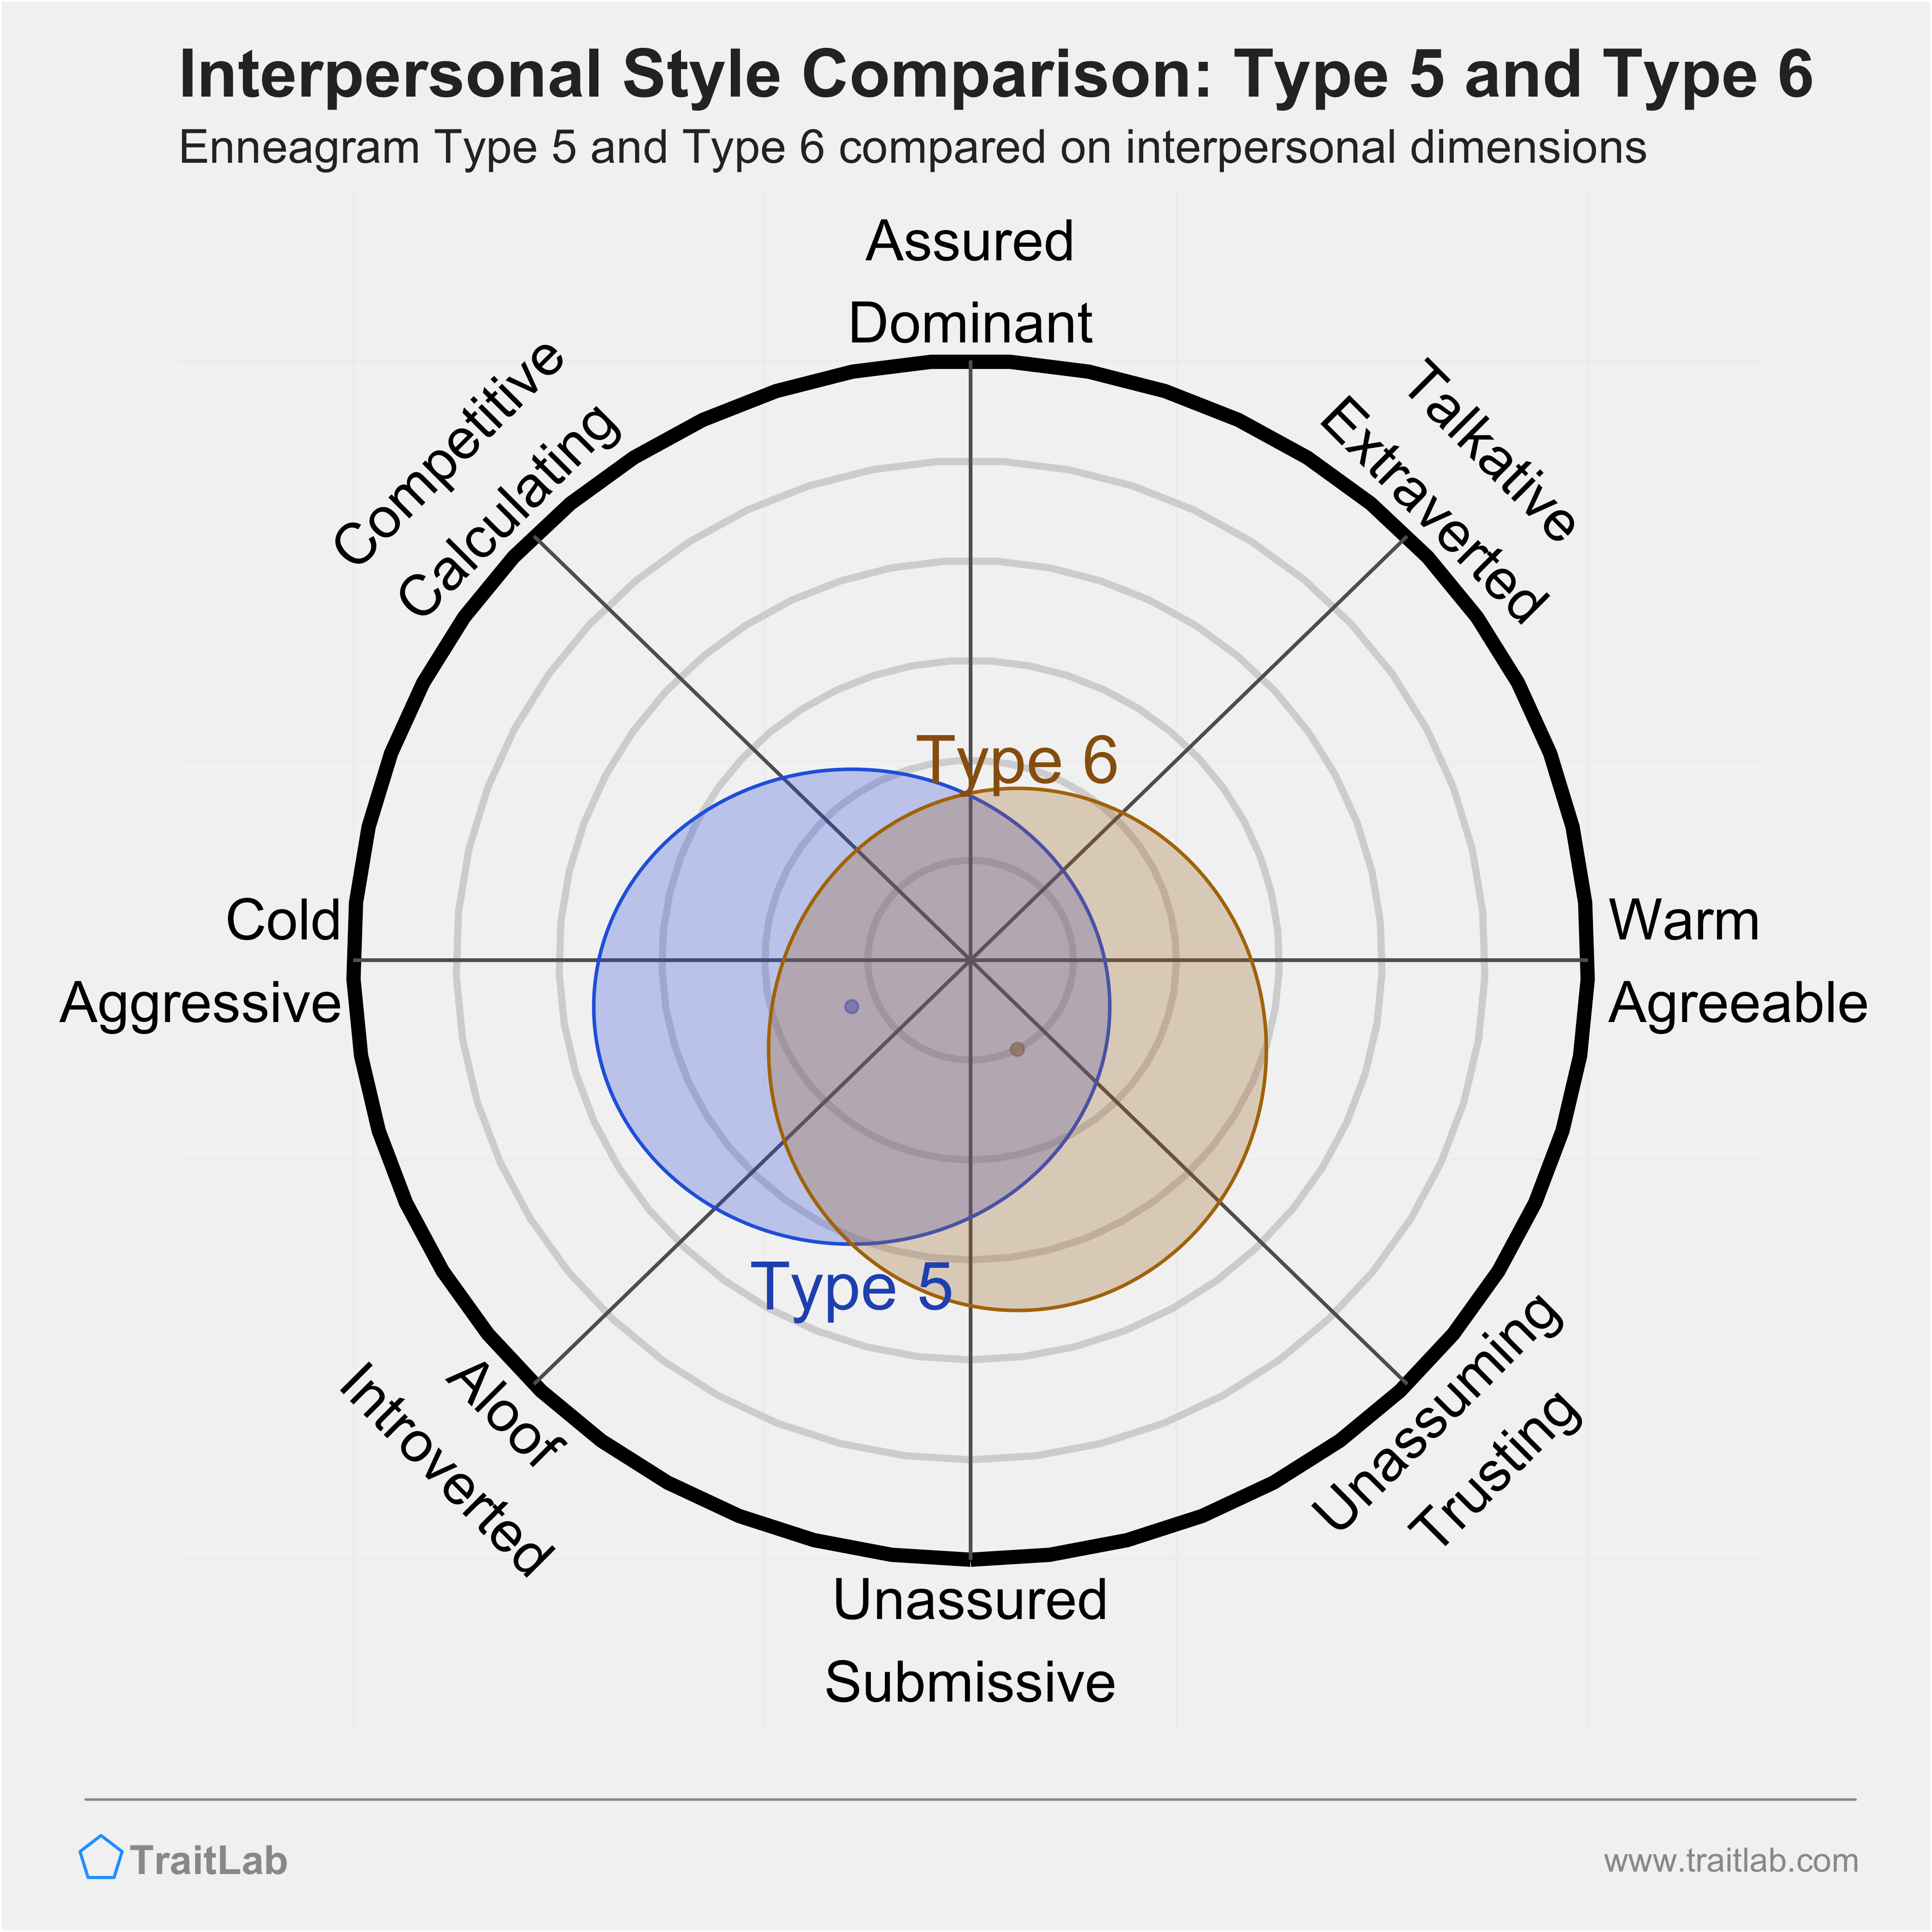 Enneagram Type 5 and Type 6 comparison across interpersonal dimensions